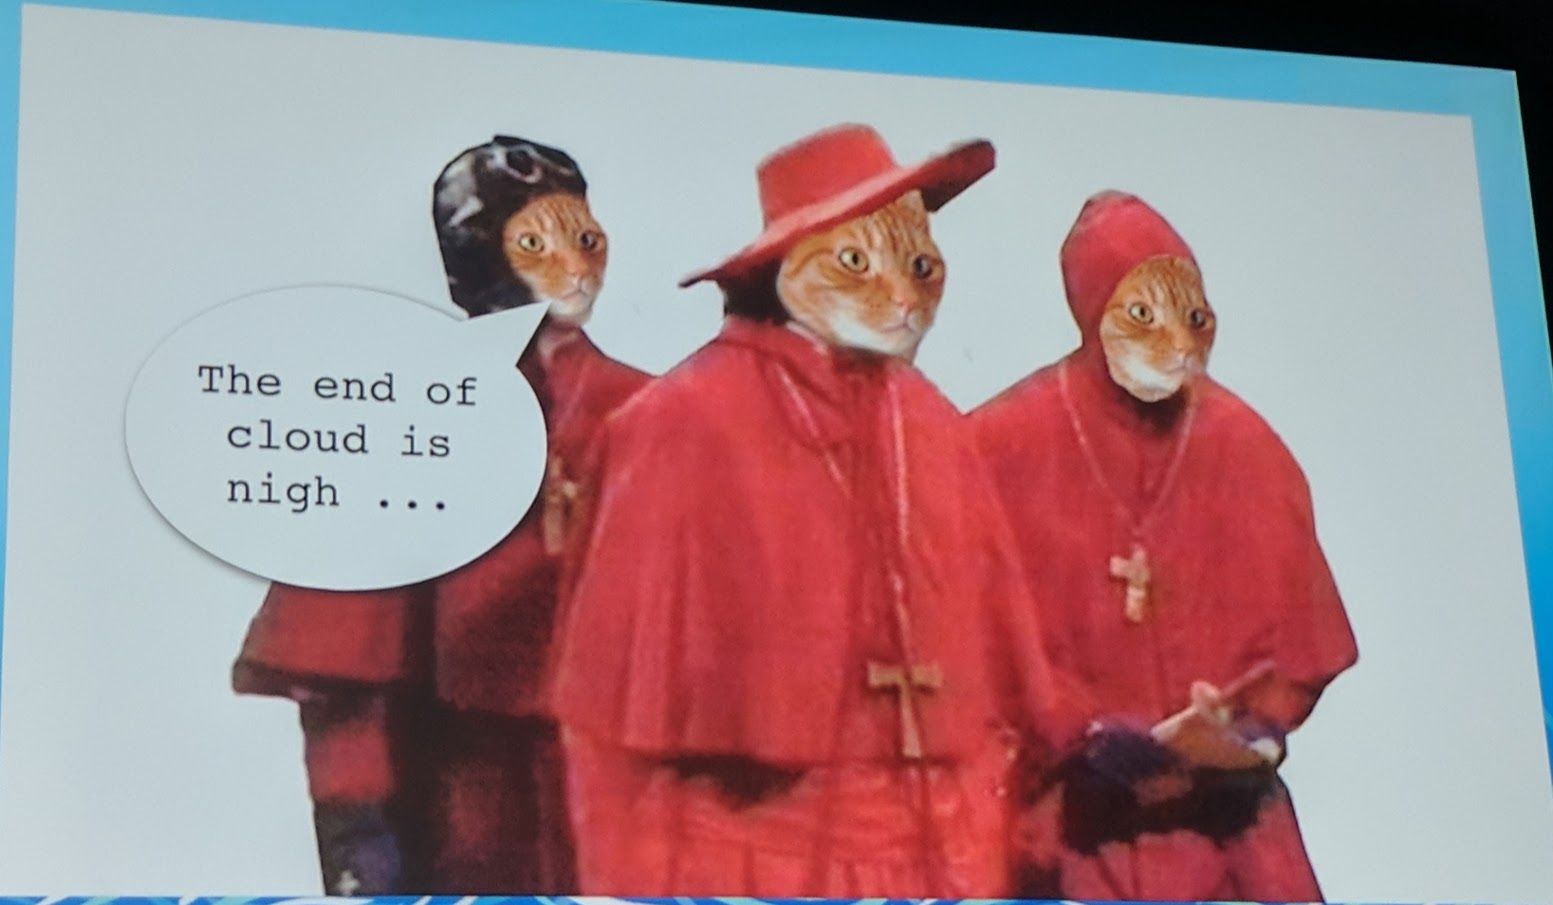 KubeCon - Keynote - Crossing the River by Feeling the Stones - 'The End of cloud is neigh ...'